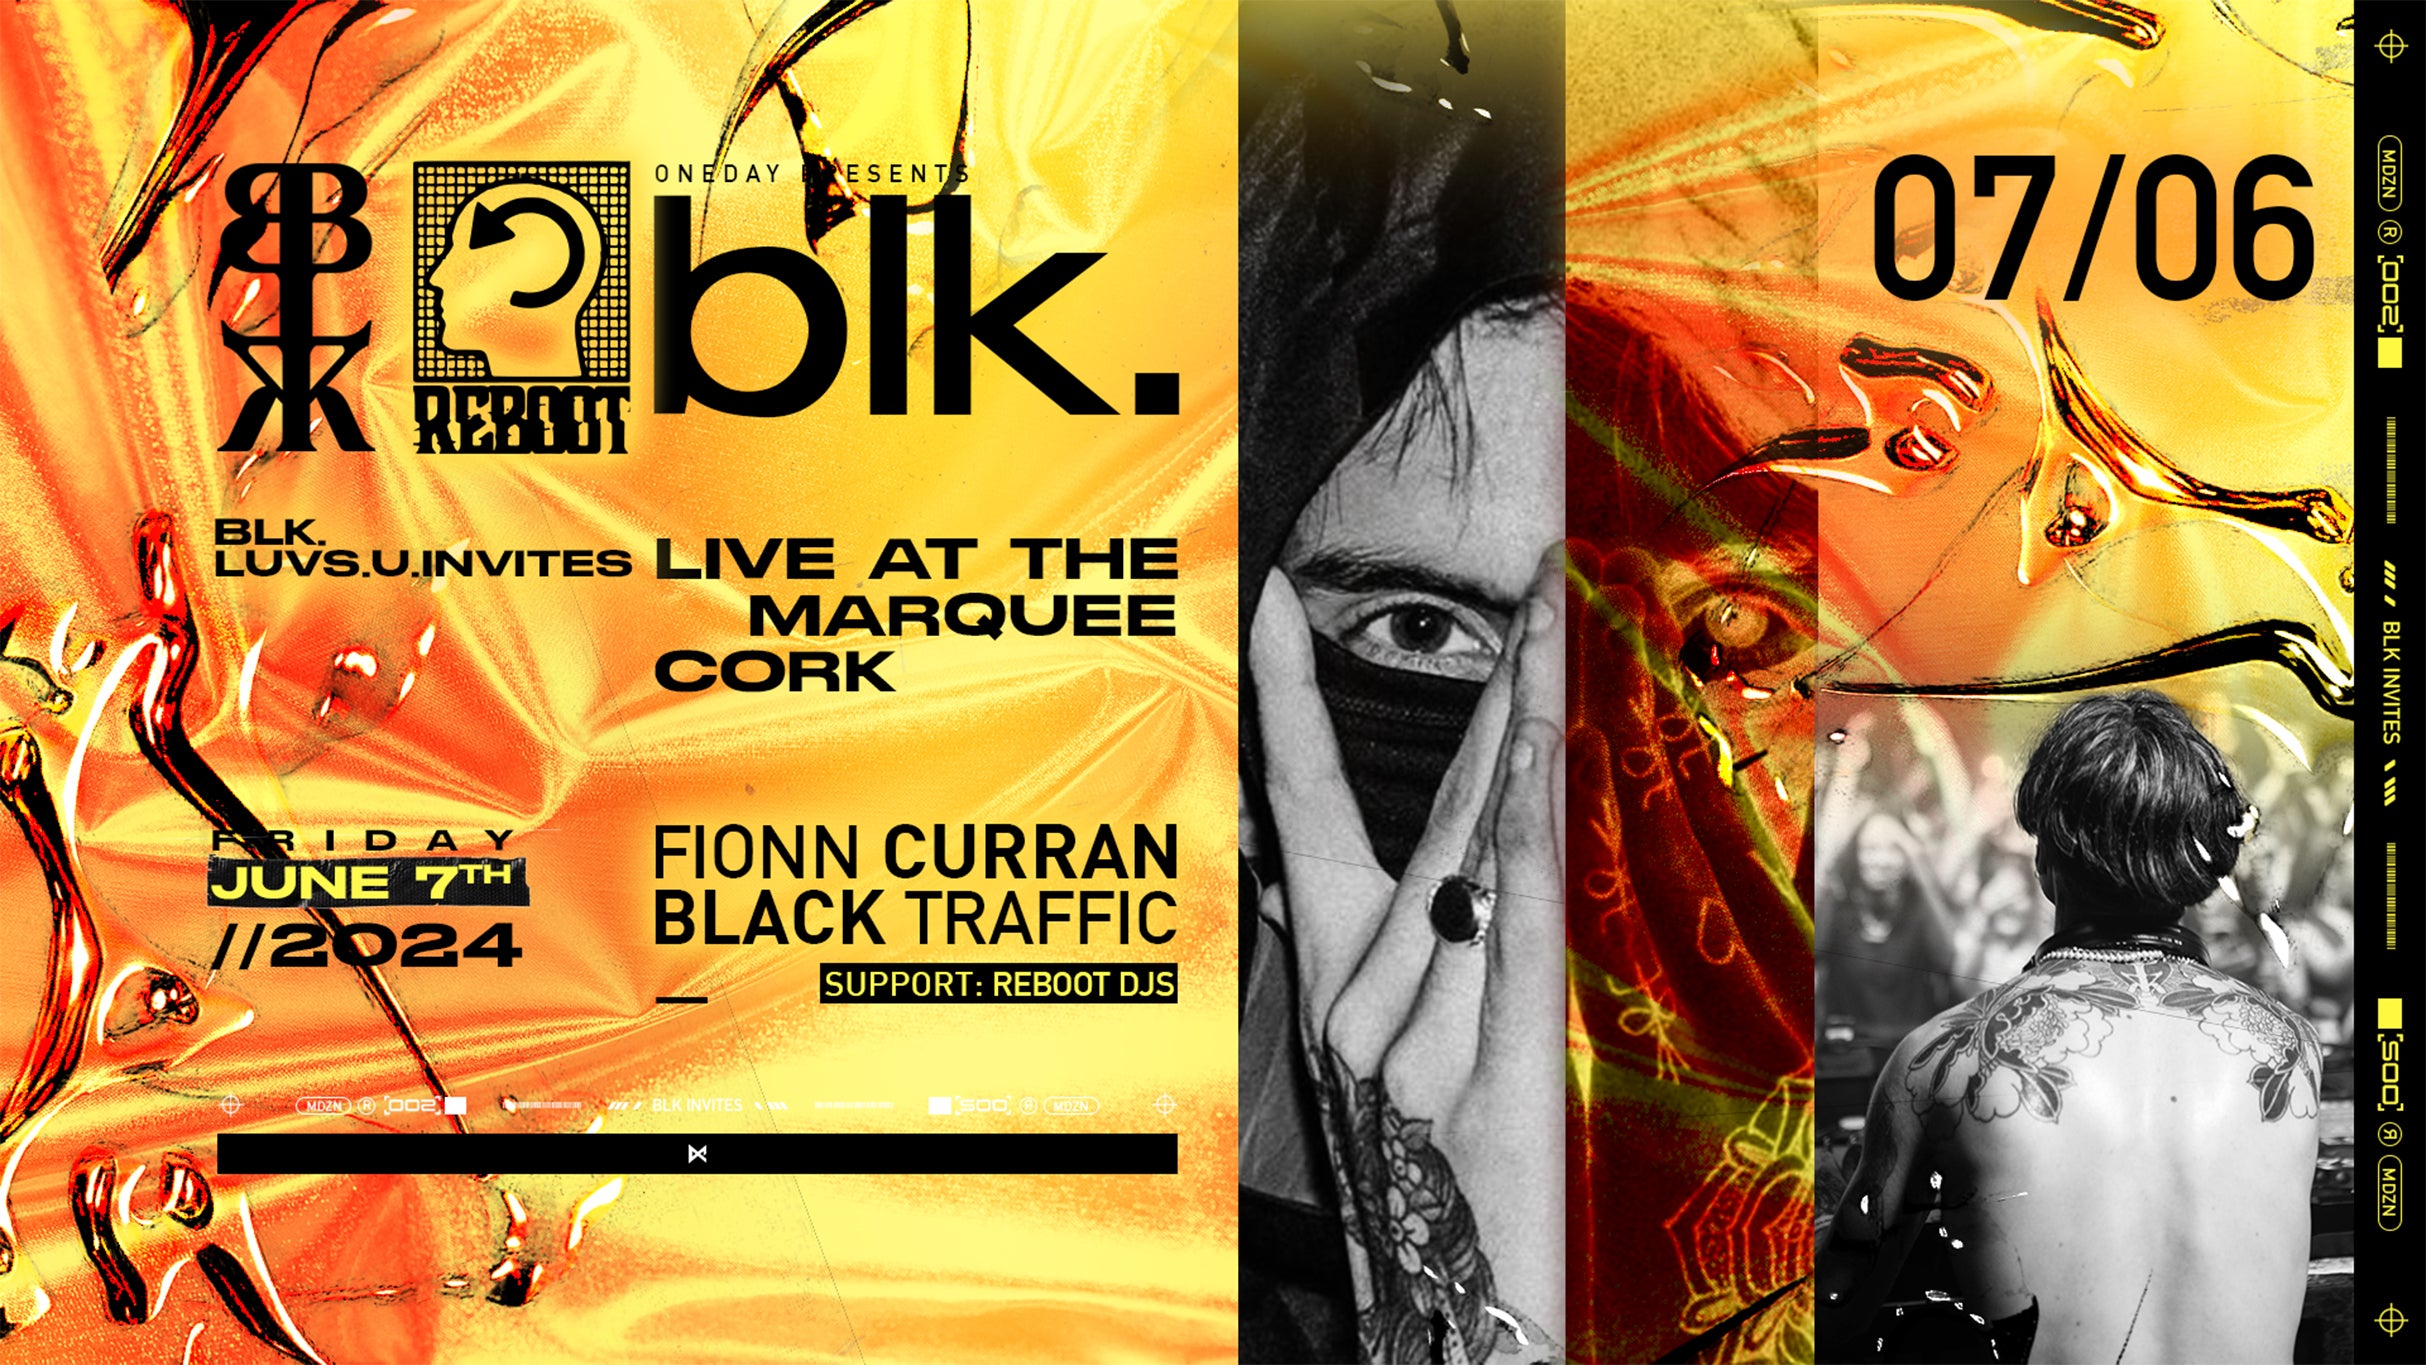 One Day Presents Blk. in Cork promo photo for Past Purchaser presale offer code